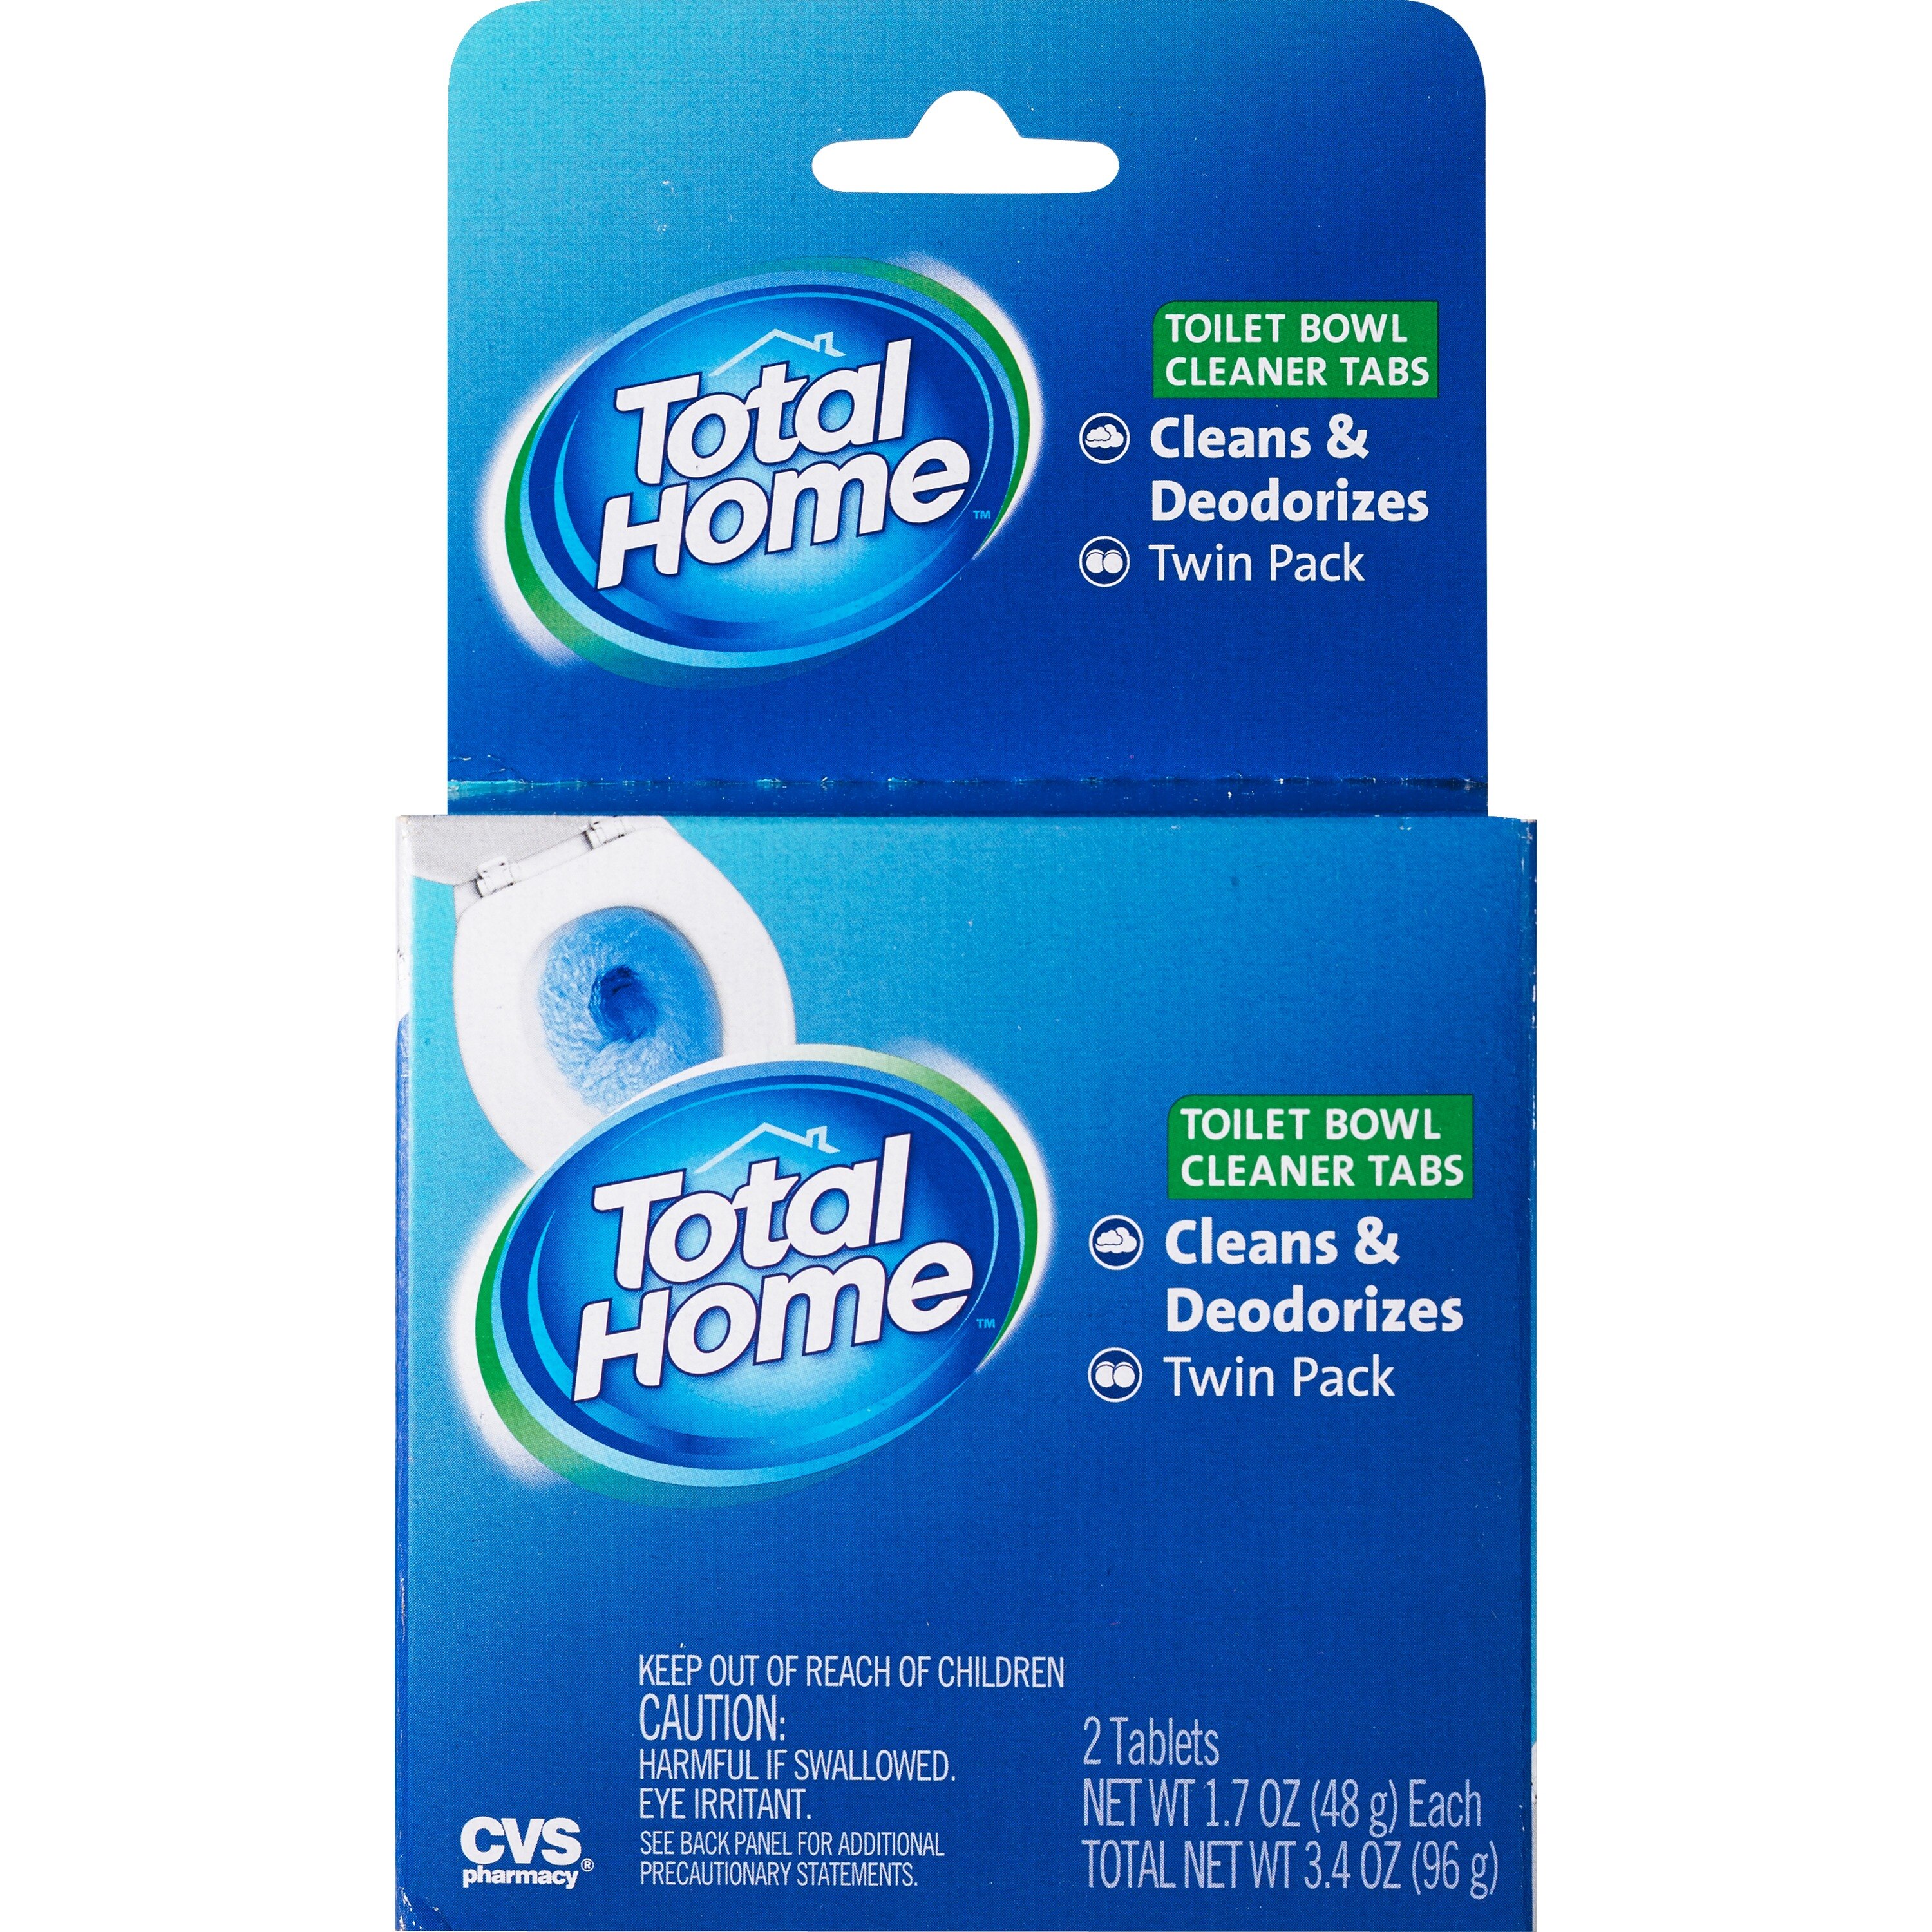 Total Home by CVS Toilet Bowl Cleaner Tabs, 2 CT